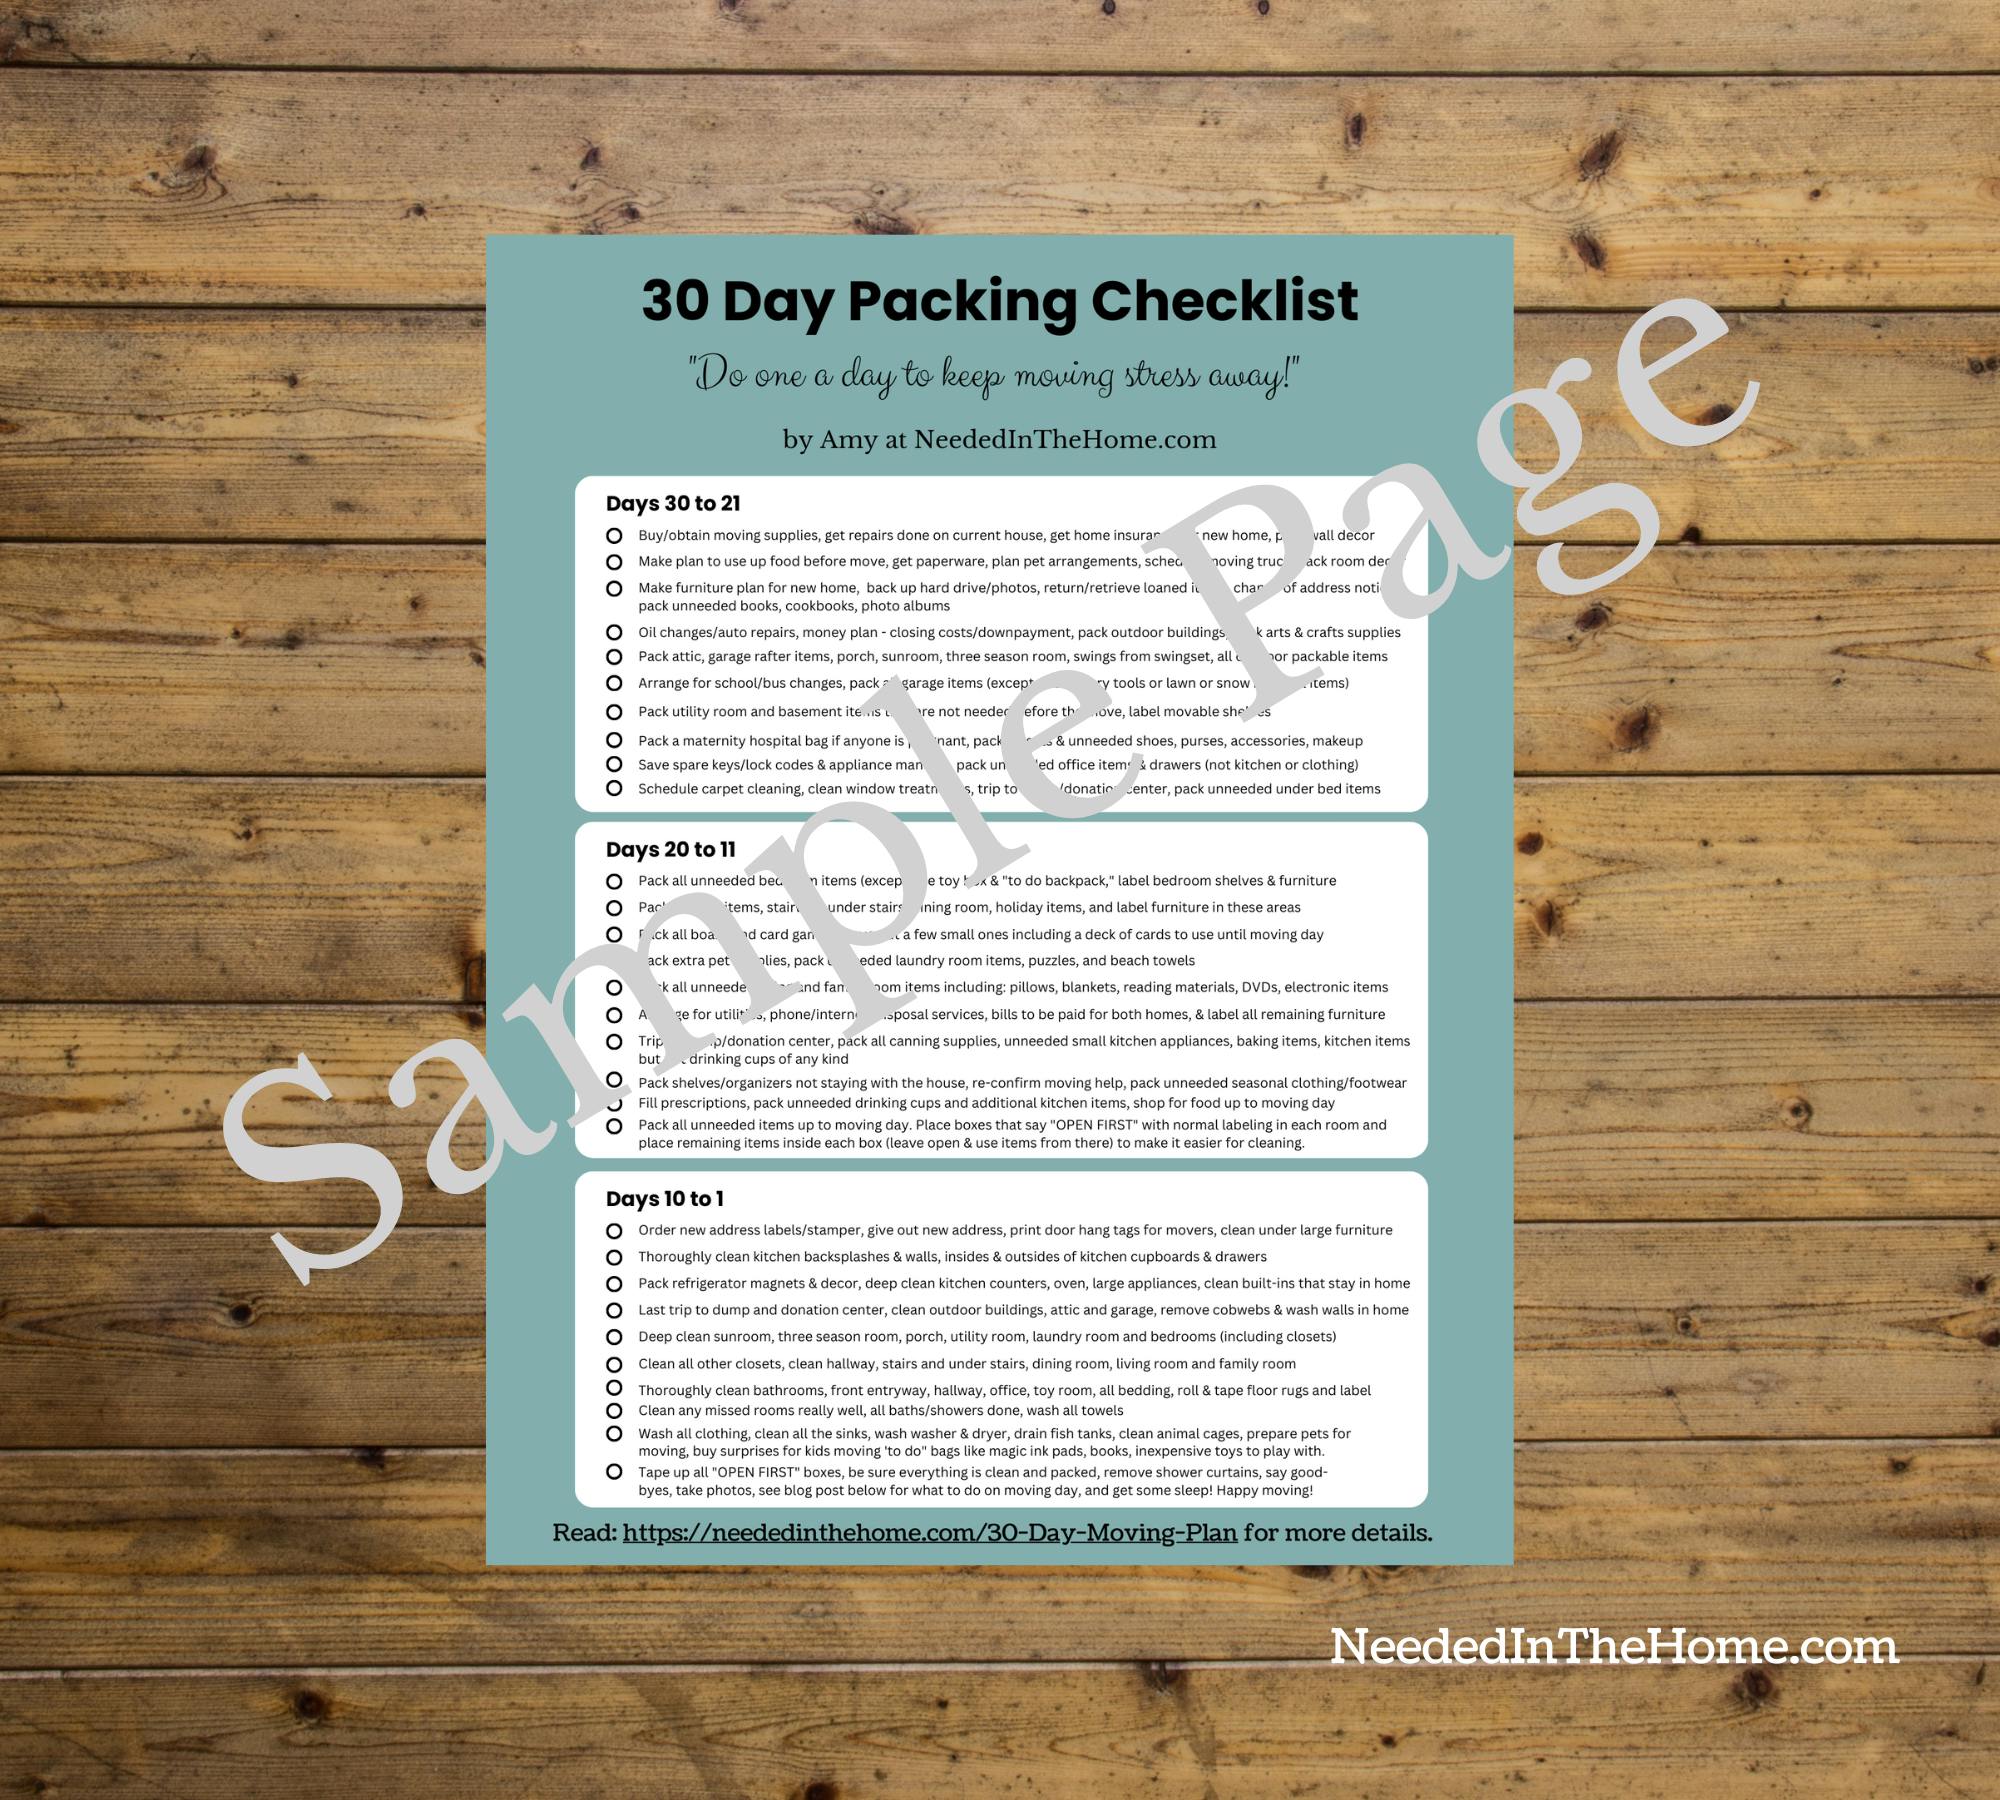 30 Day Packing Checklist for Moving